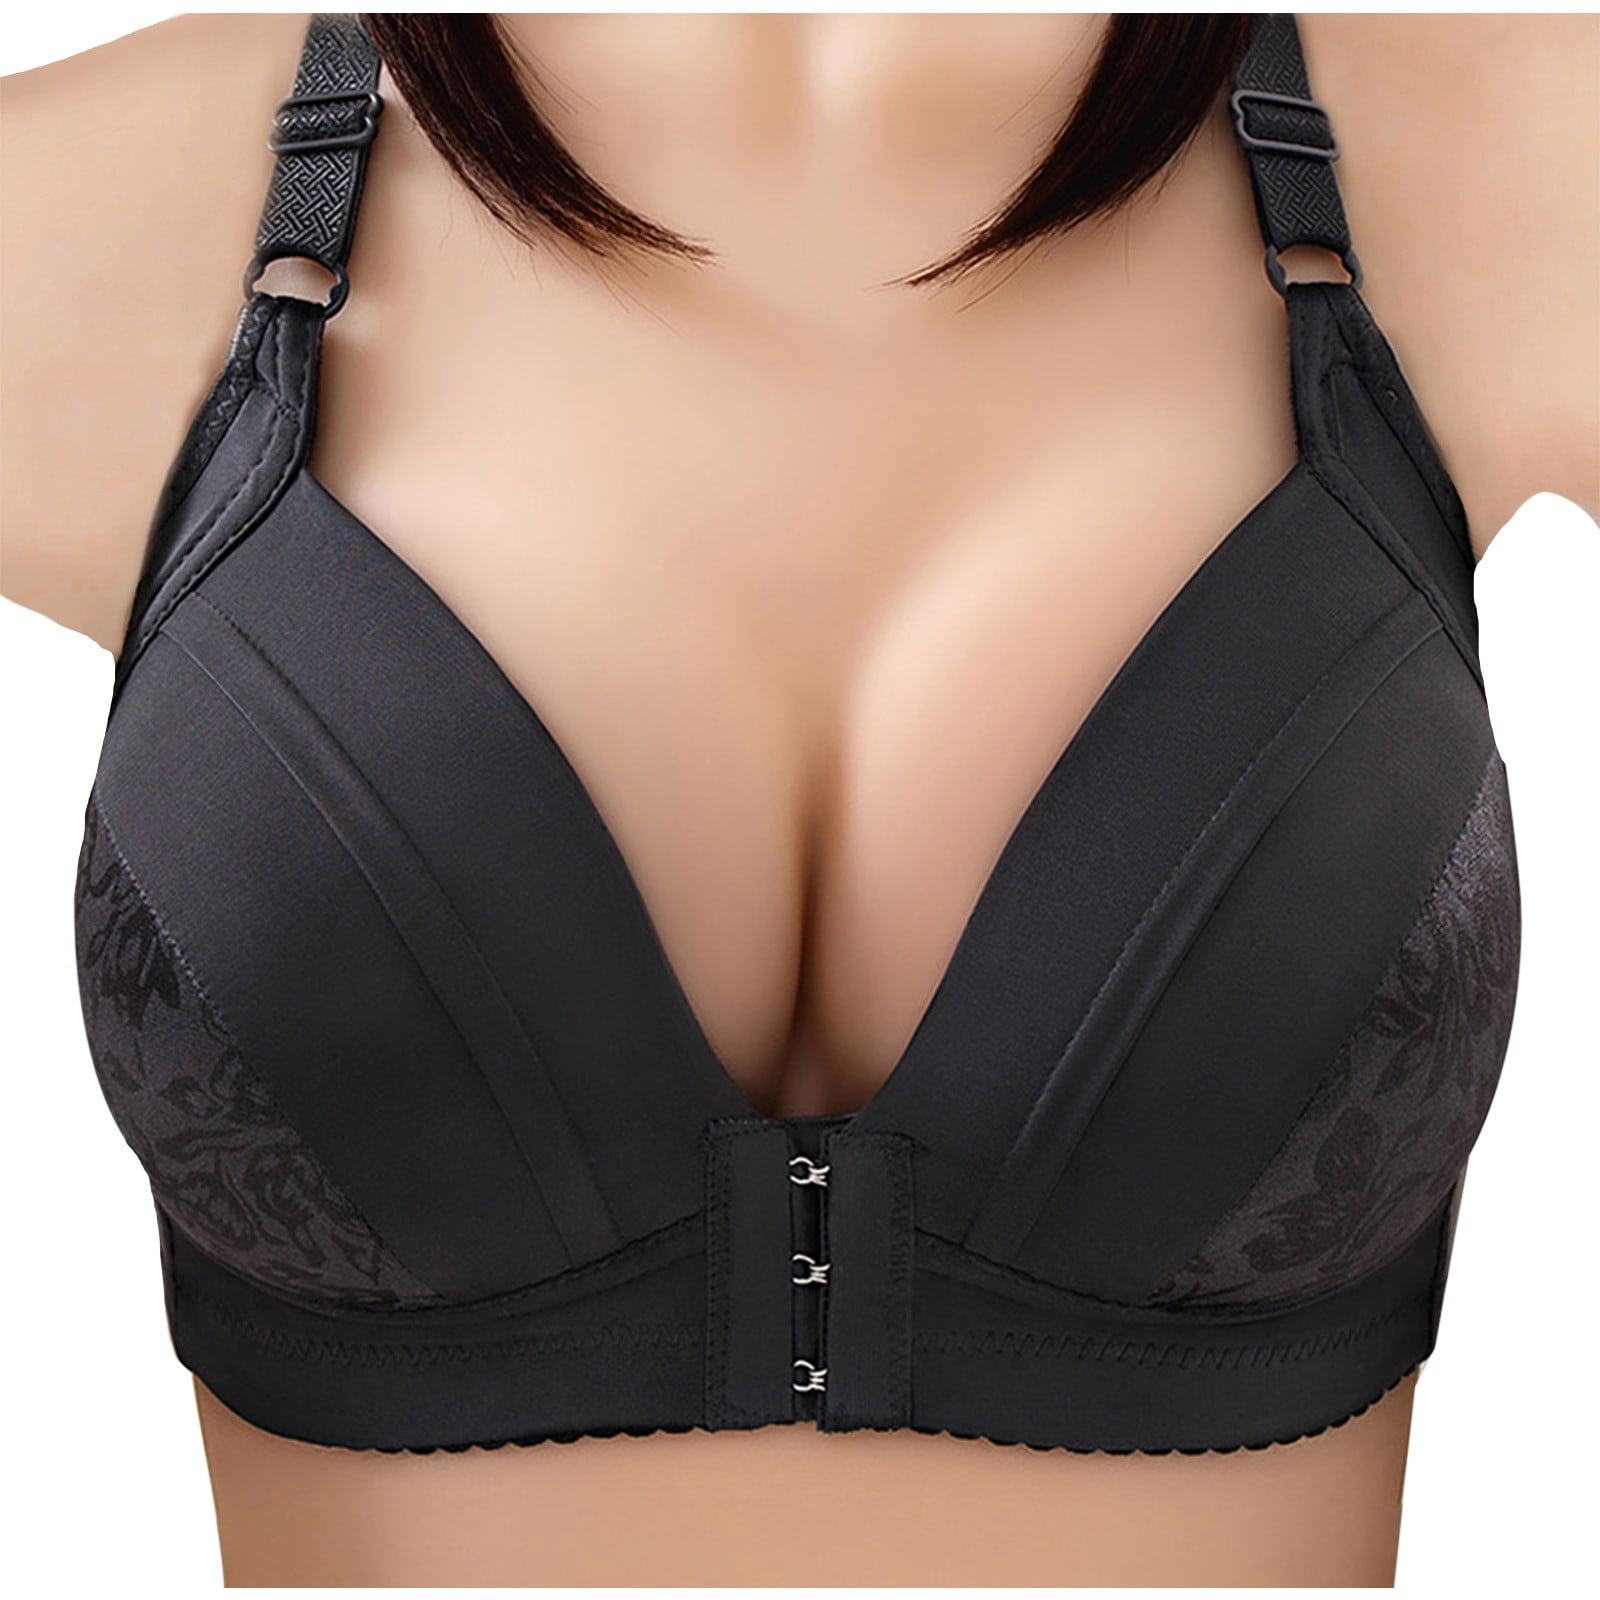 HGps8w Front Closure Plus Suze Bras for Women, Wirefree Back